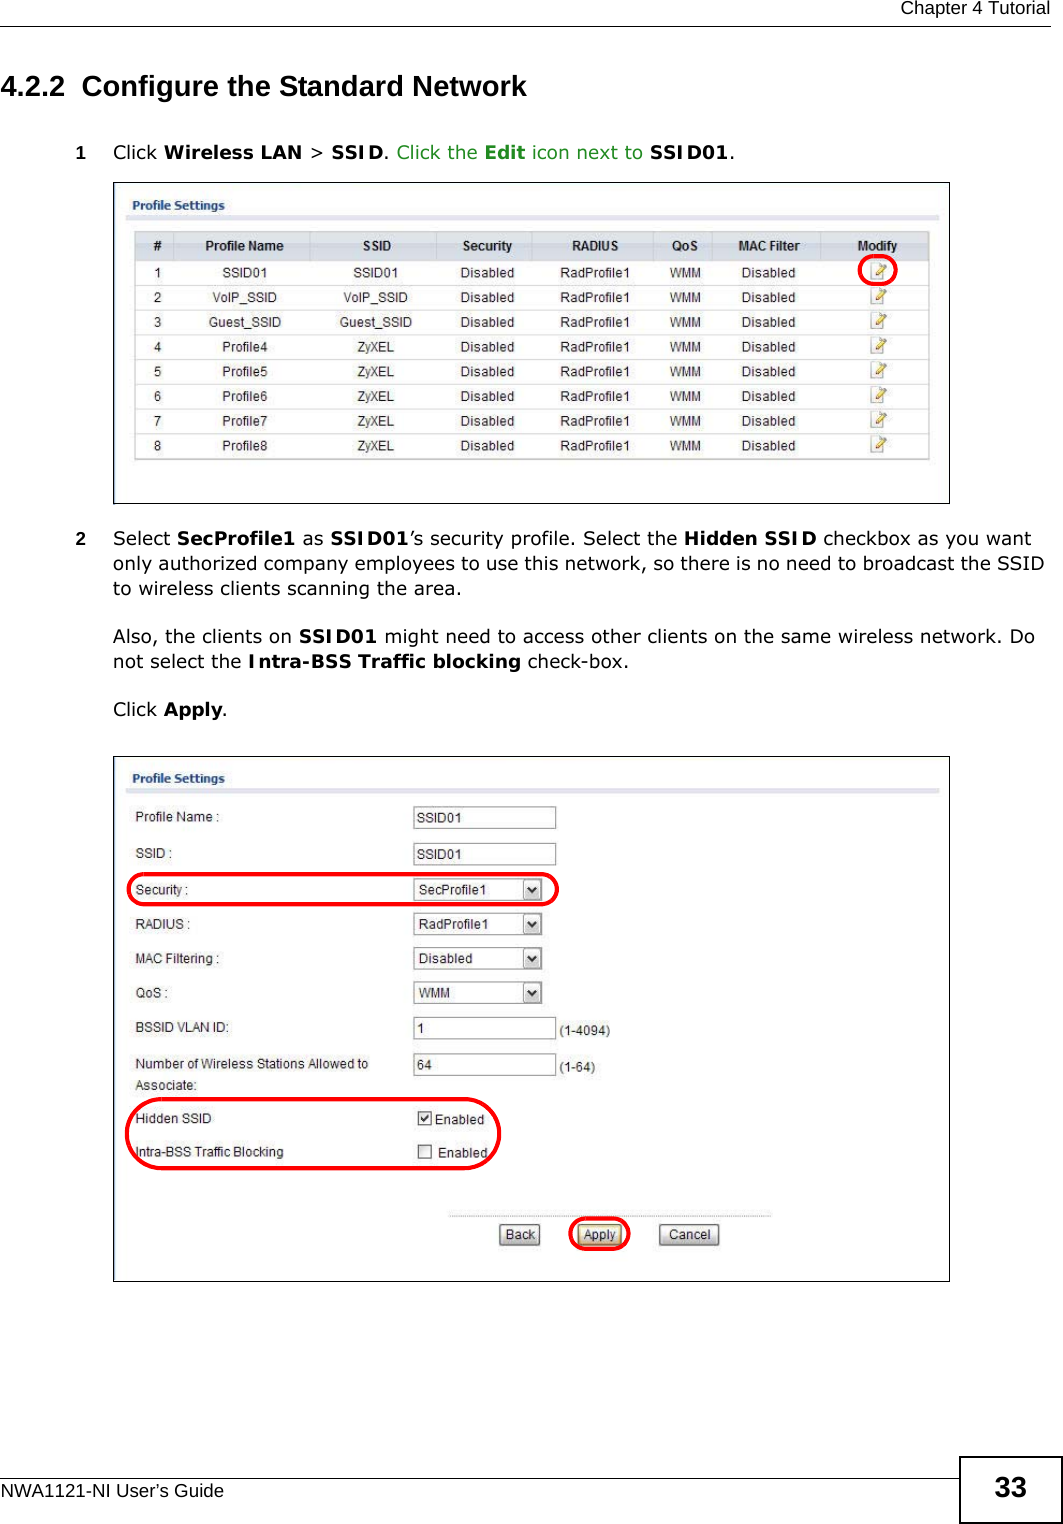  Chapter 4 TutorialNWA1121-NI User’s Guide 334.2.2  Configure the Standard Network1Click Wireless LAN &gt; SSID. Click the Edit icon next to SSID01. 2Select SecProfile1 as SSID01’s security profile. Select the Hidden SSID checkbox as you want only authorized company employees to use this network, so there is no need to broadcast the SSID to wireless clients scanning the area. Also, the clients on SSID01 might need to access other clients on the same wireless network. Do not select the Intra-BSS Traffic blocking check-box. Click Apply.